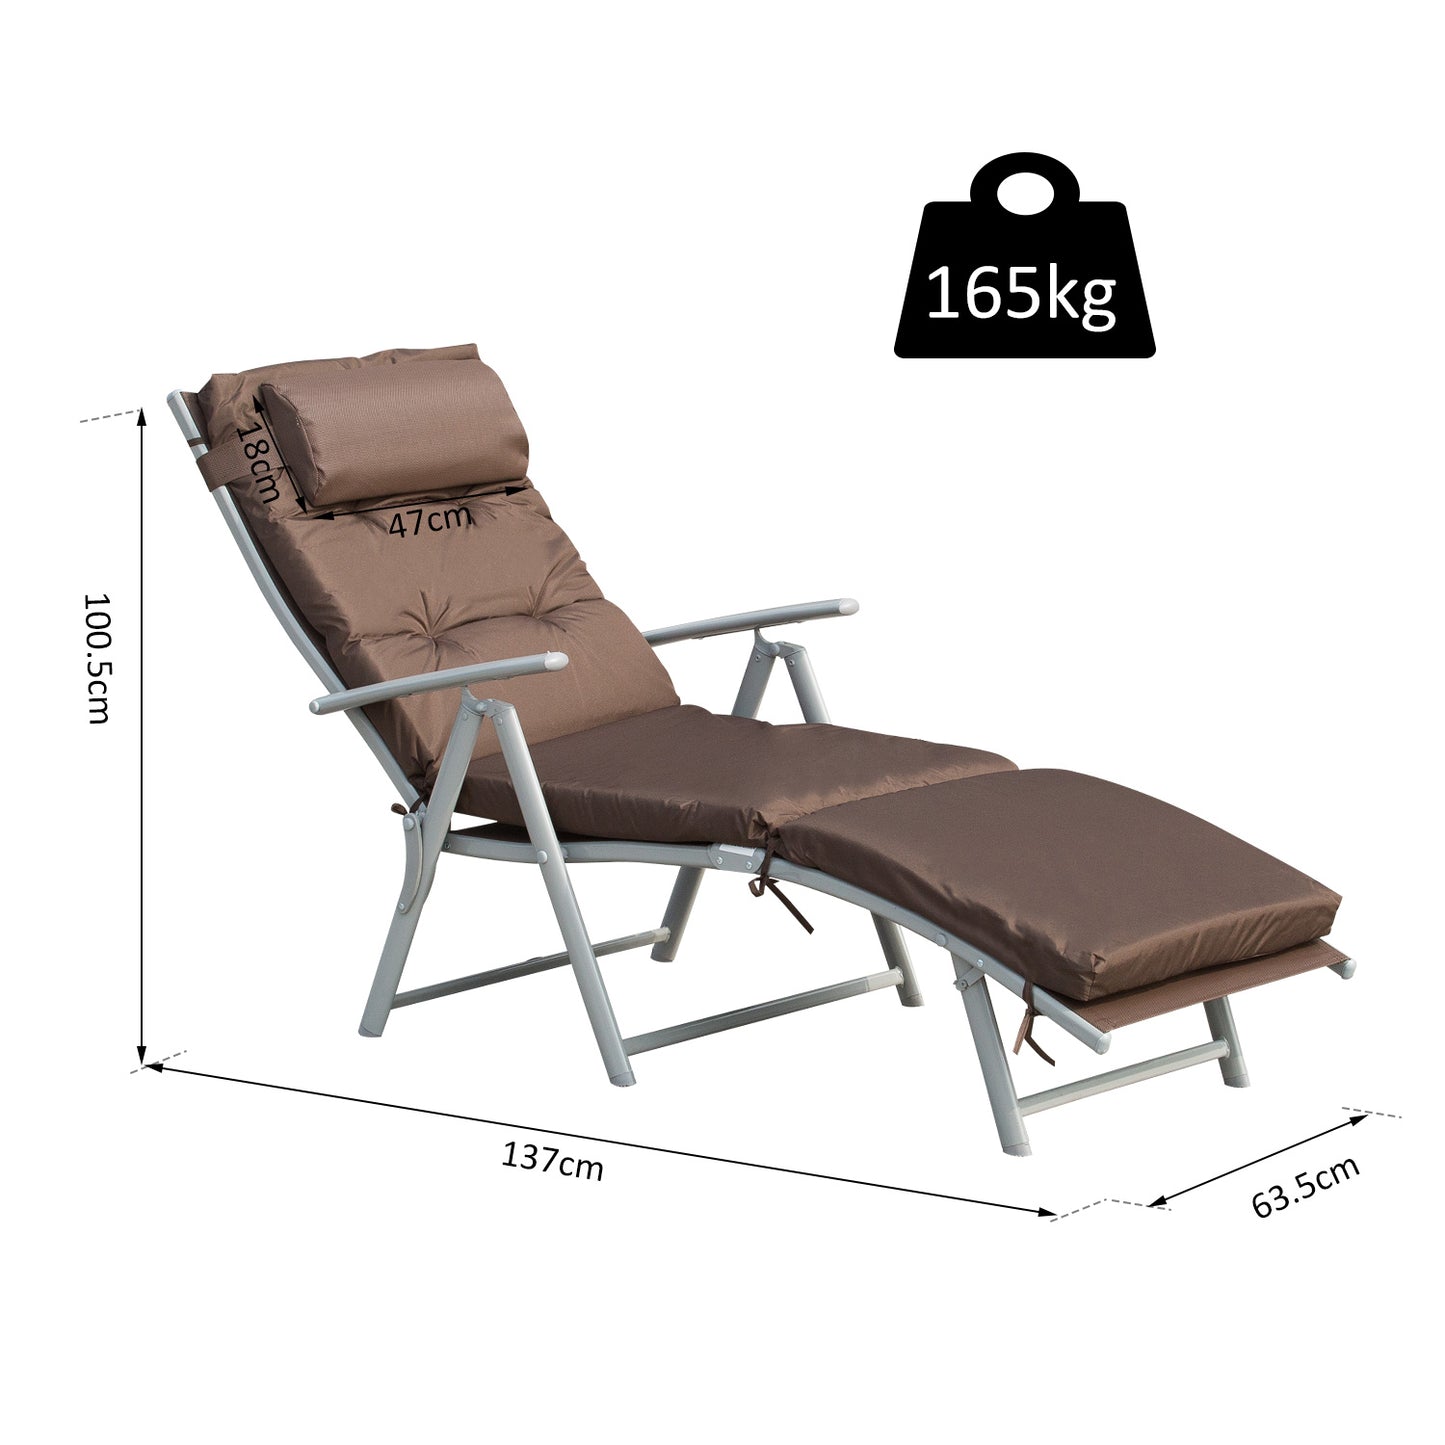 Outsunny Garden Sun Lounger, Foldable Reclining Chair with Pillow and Adjustable Back, Texteline Fabric, Brown